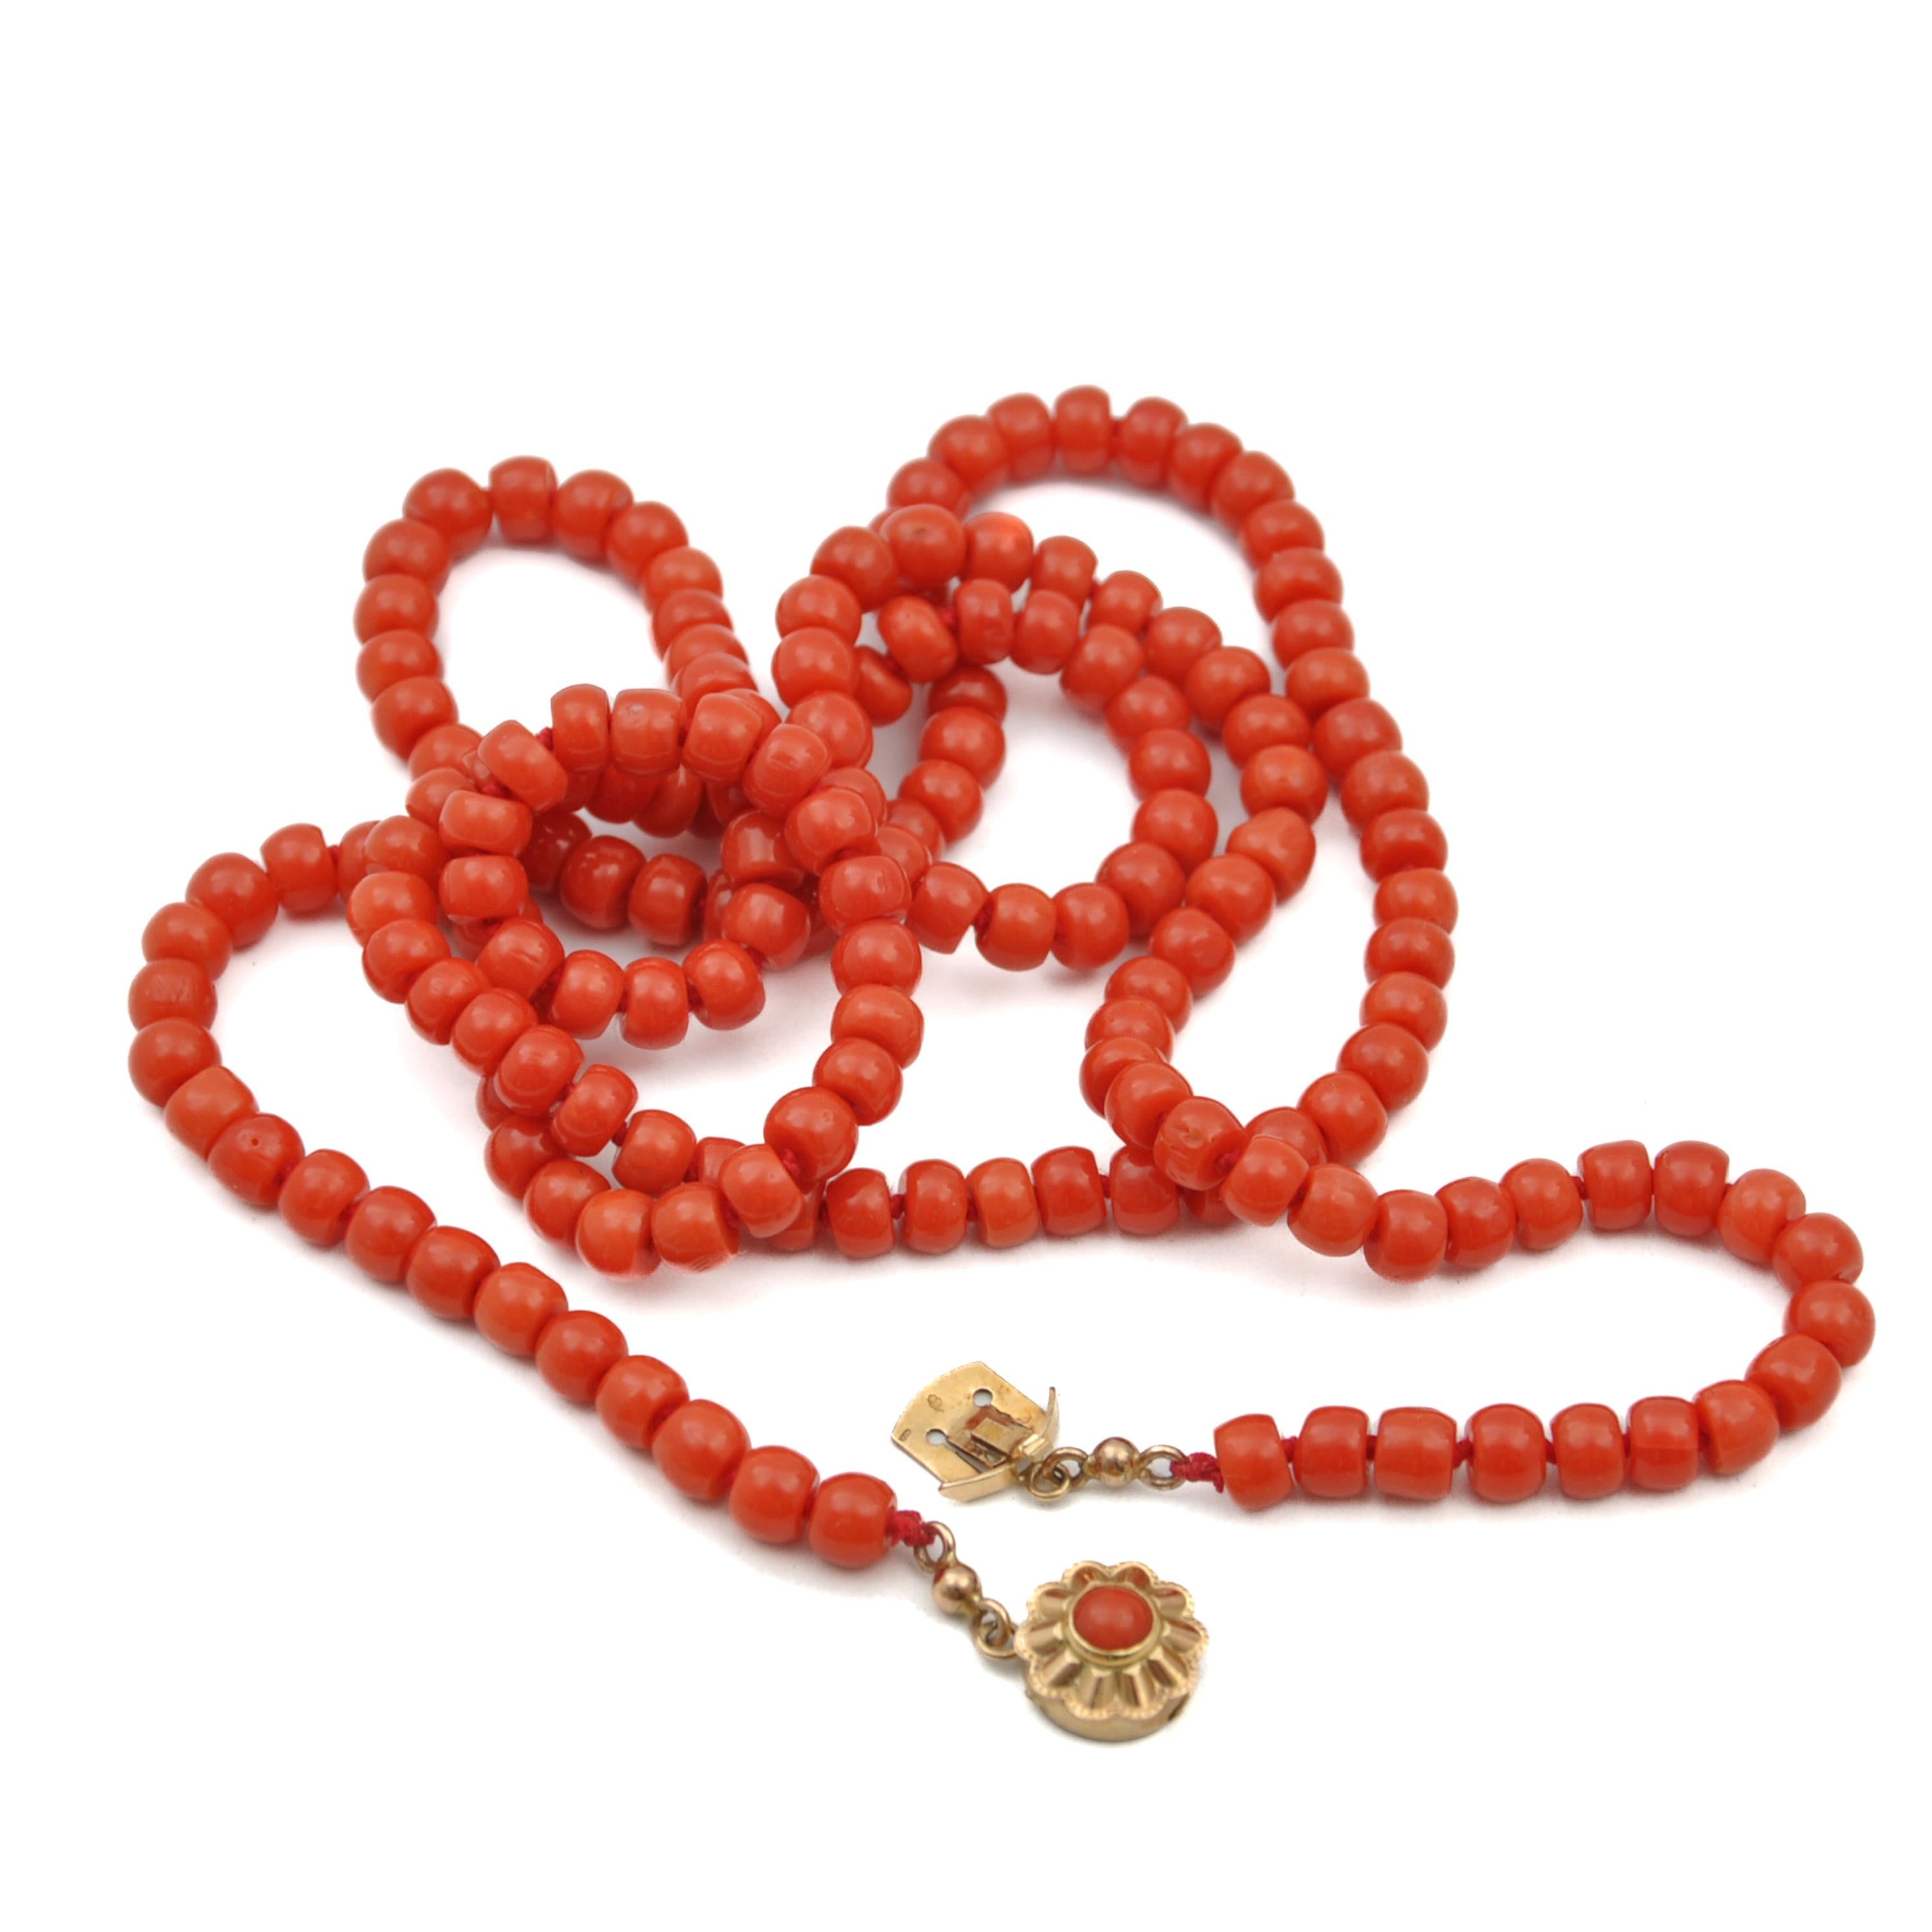 Women's or Men's Vintage Natural Coral Single-Strand Long Beaded Necklace